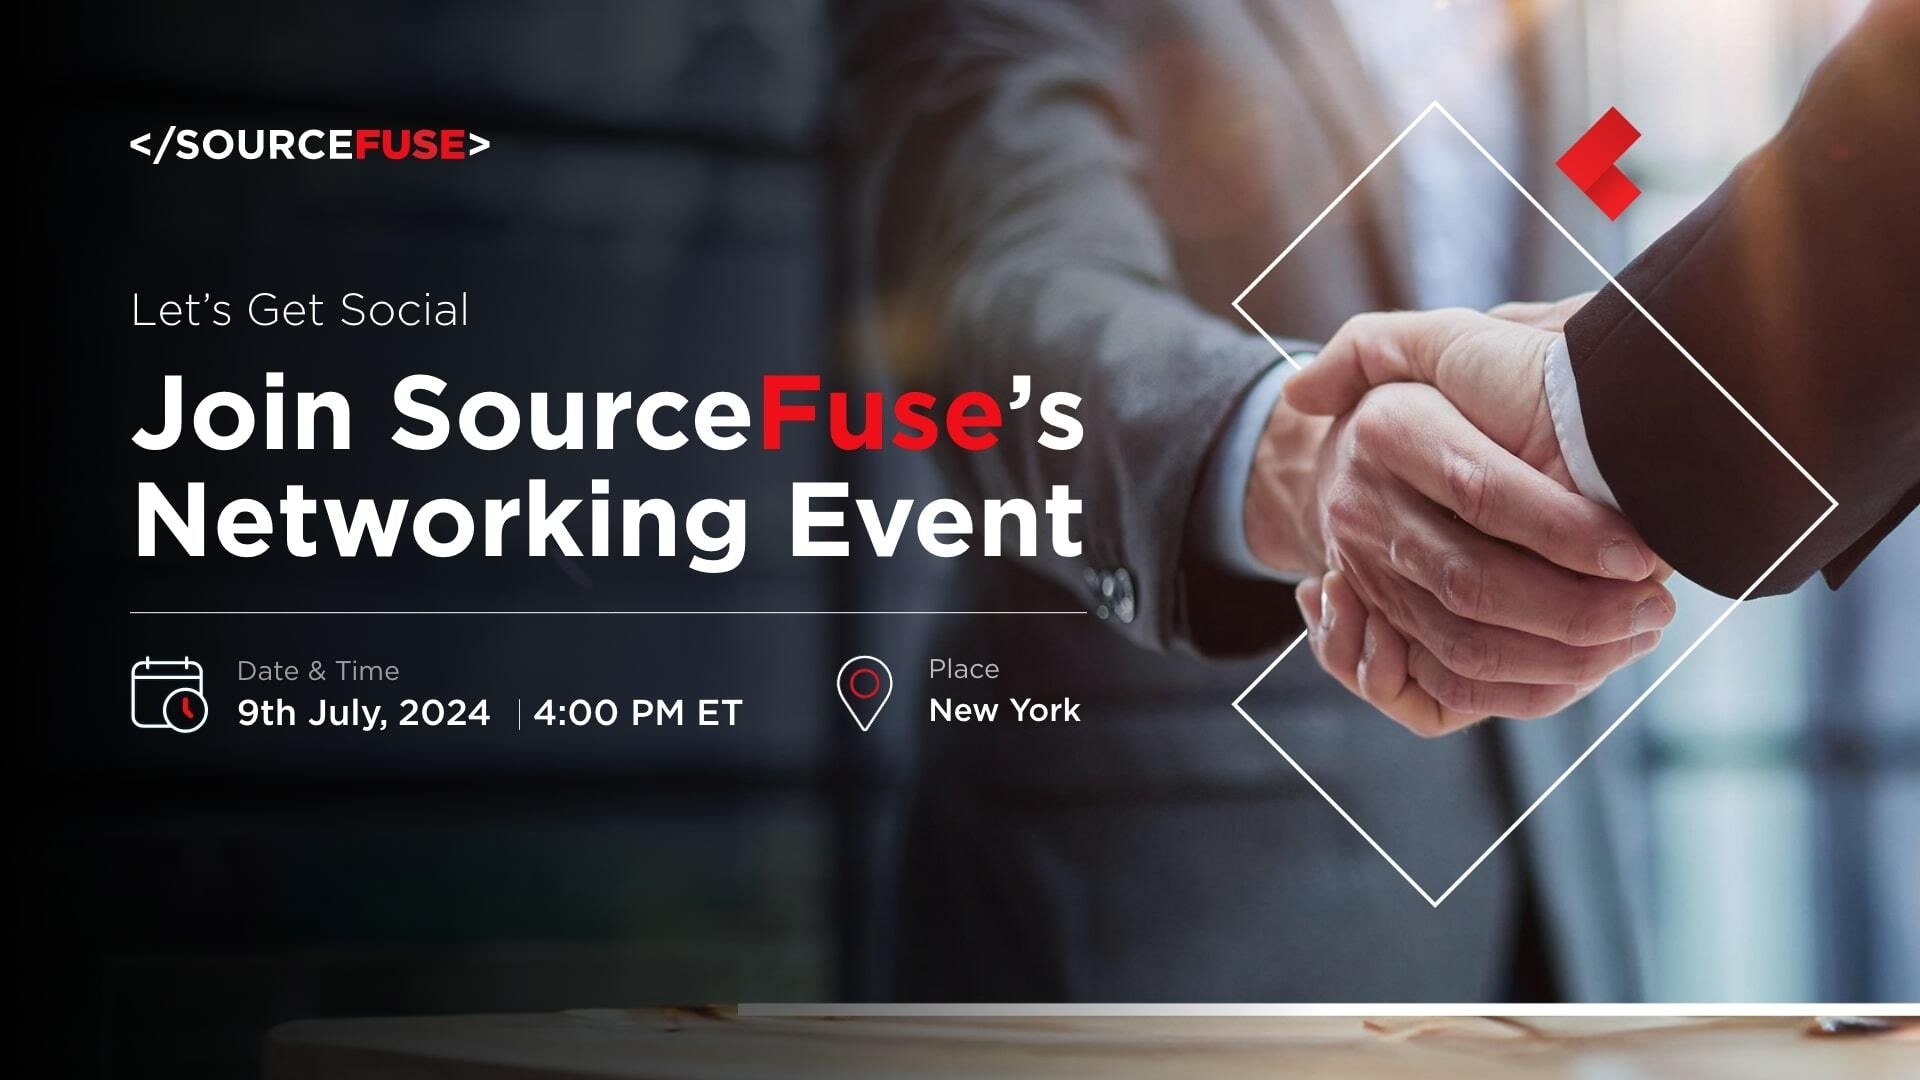 Let’s Get Social: Join SourceFuse’s Networking Event